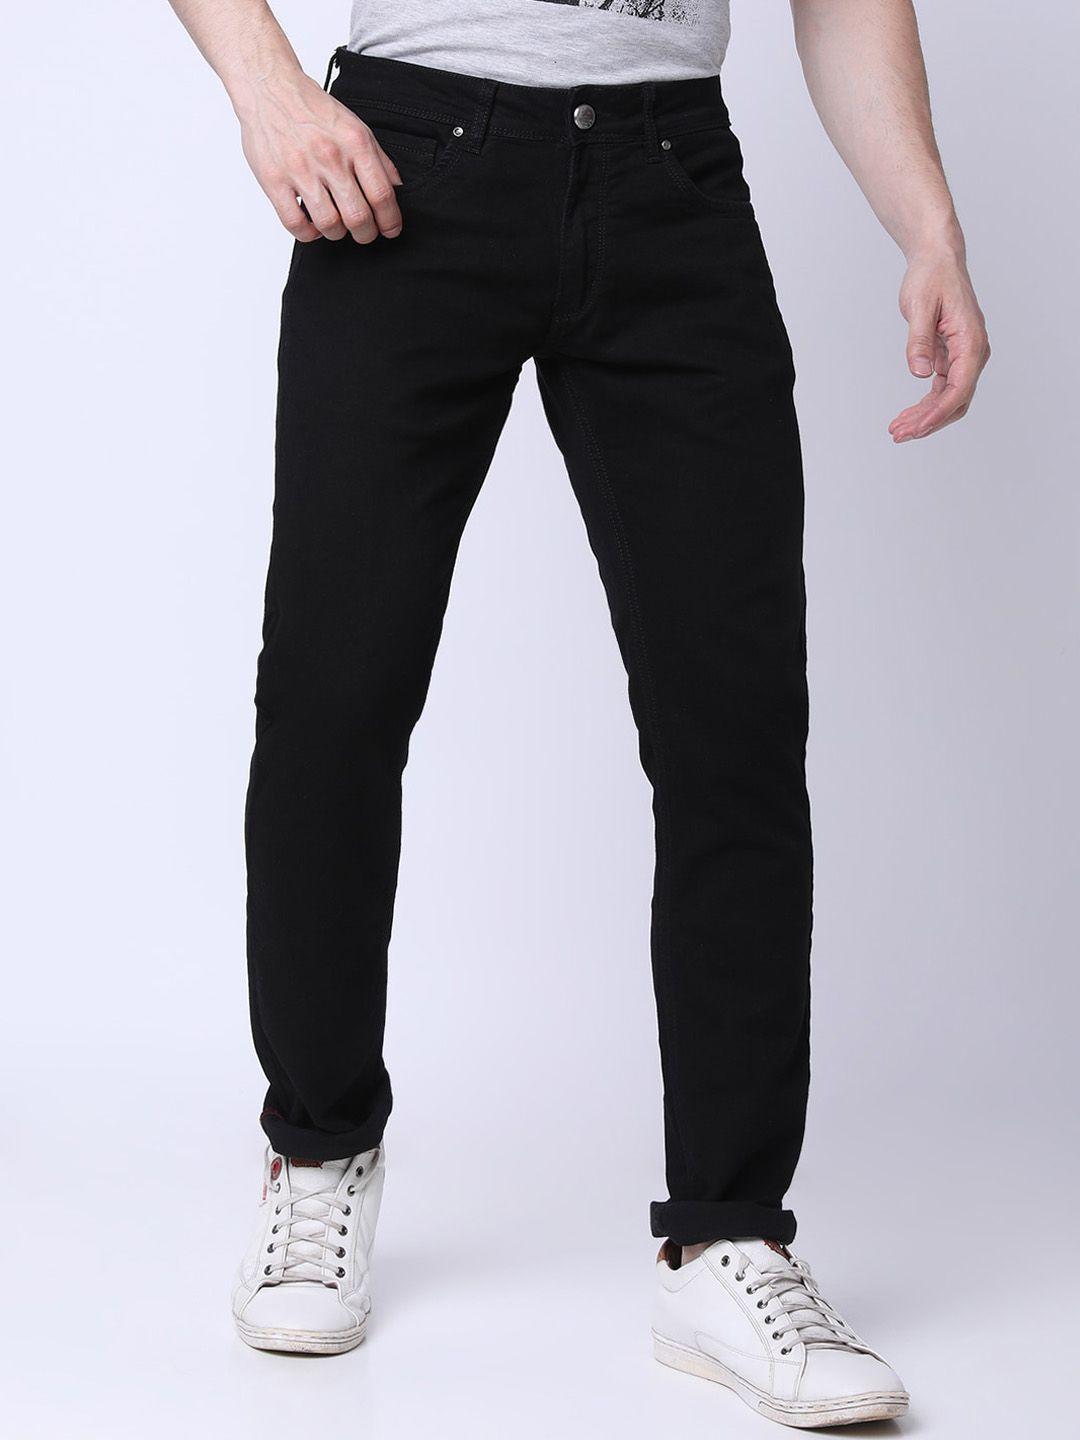 oxemberg men mid-rise clean look lean slim fit stretchable jeans